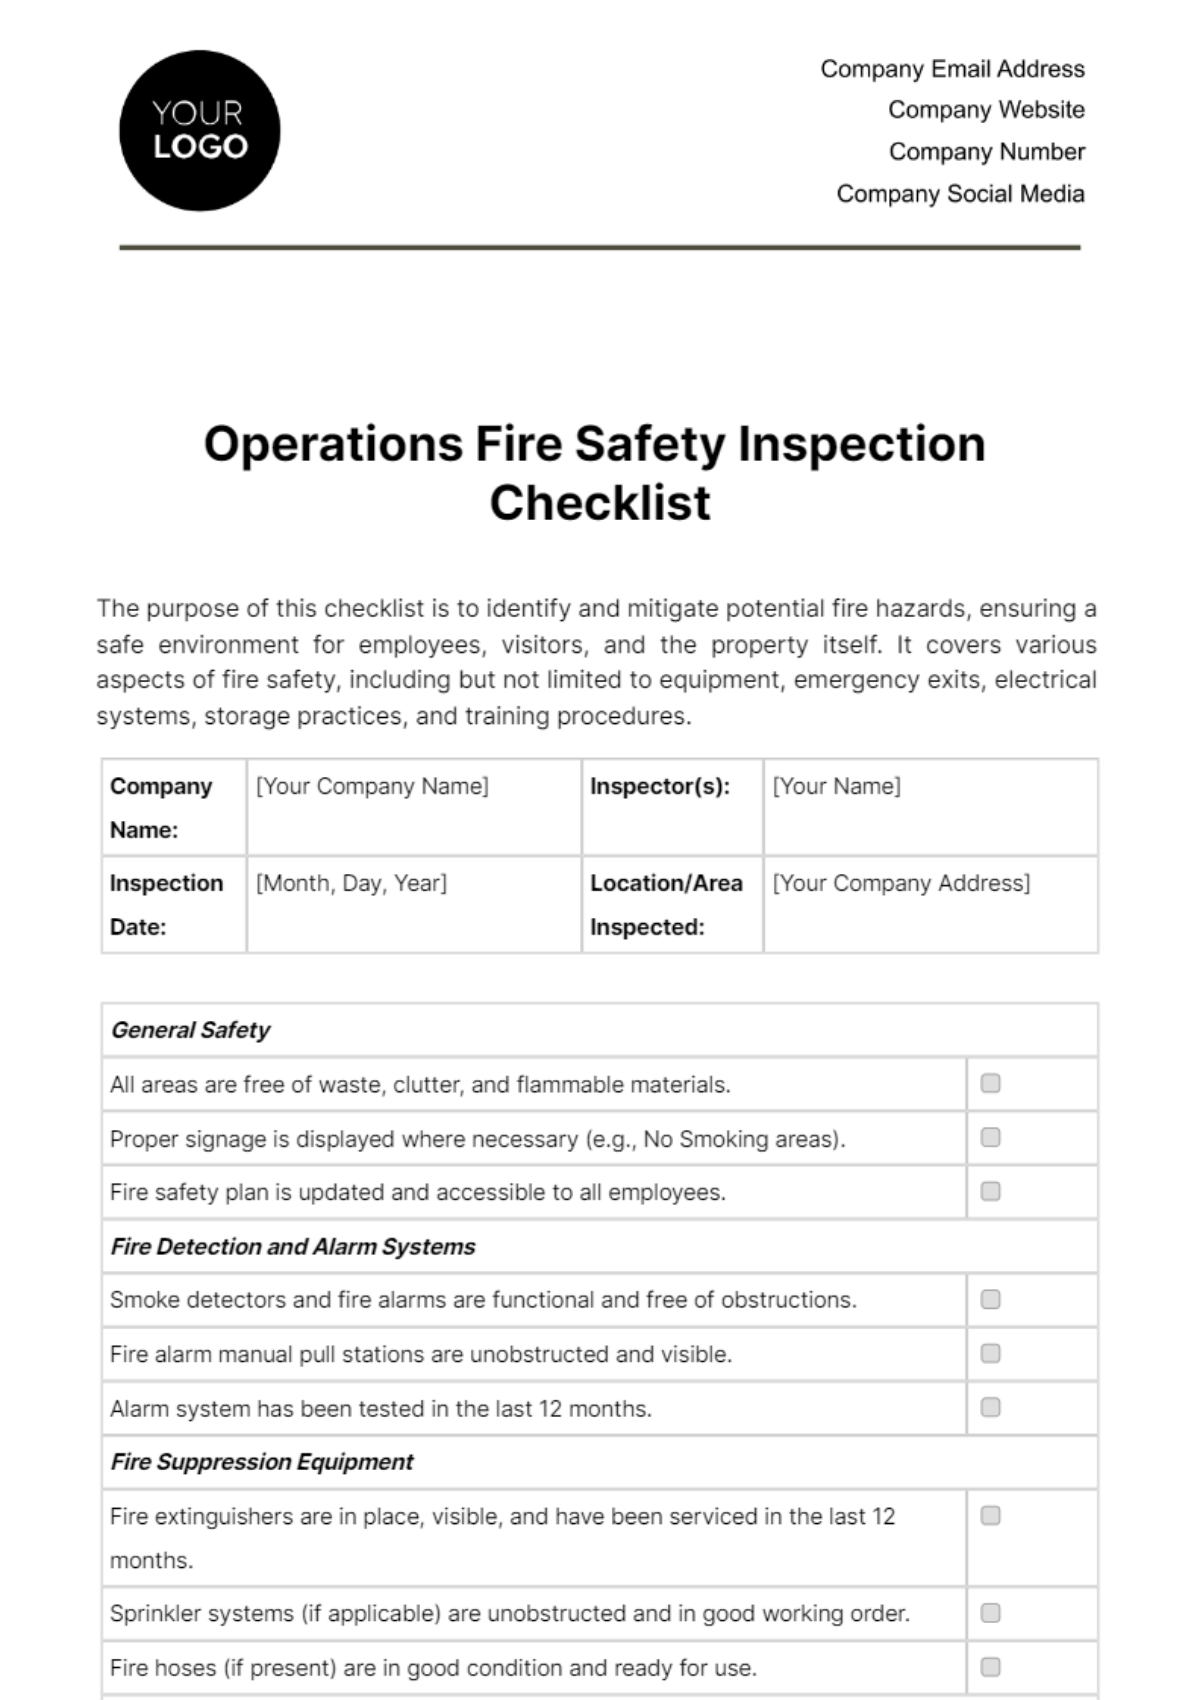 Operations Fire Safety Inspection Checklist Template